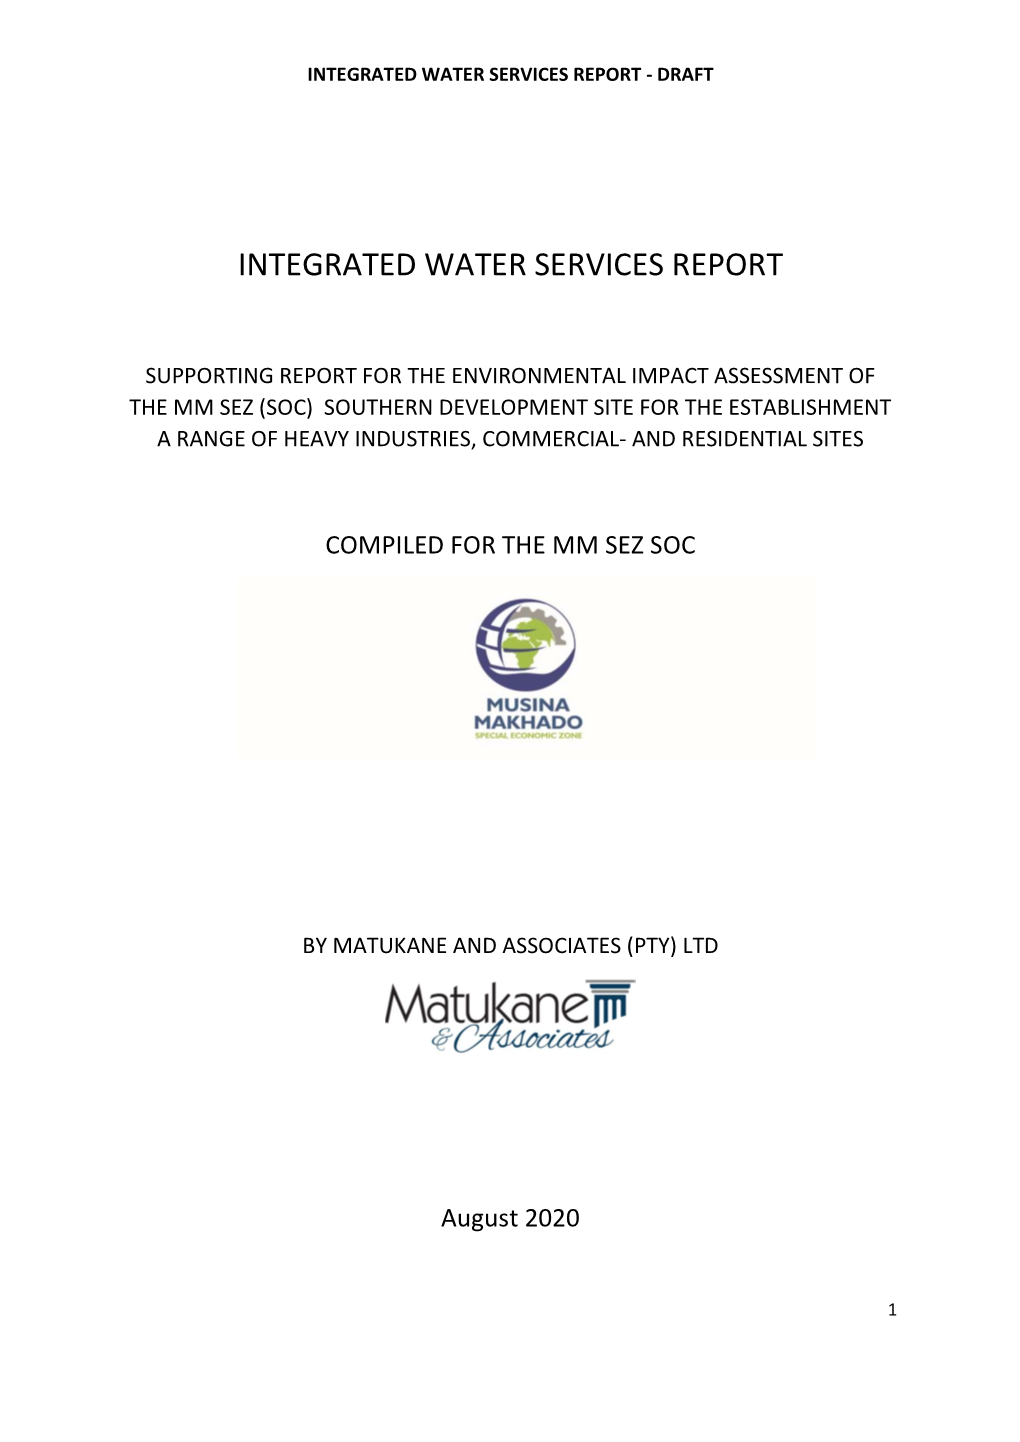 Integrated Water Services Report - Draft